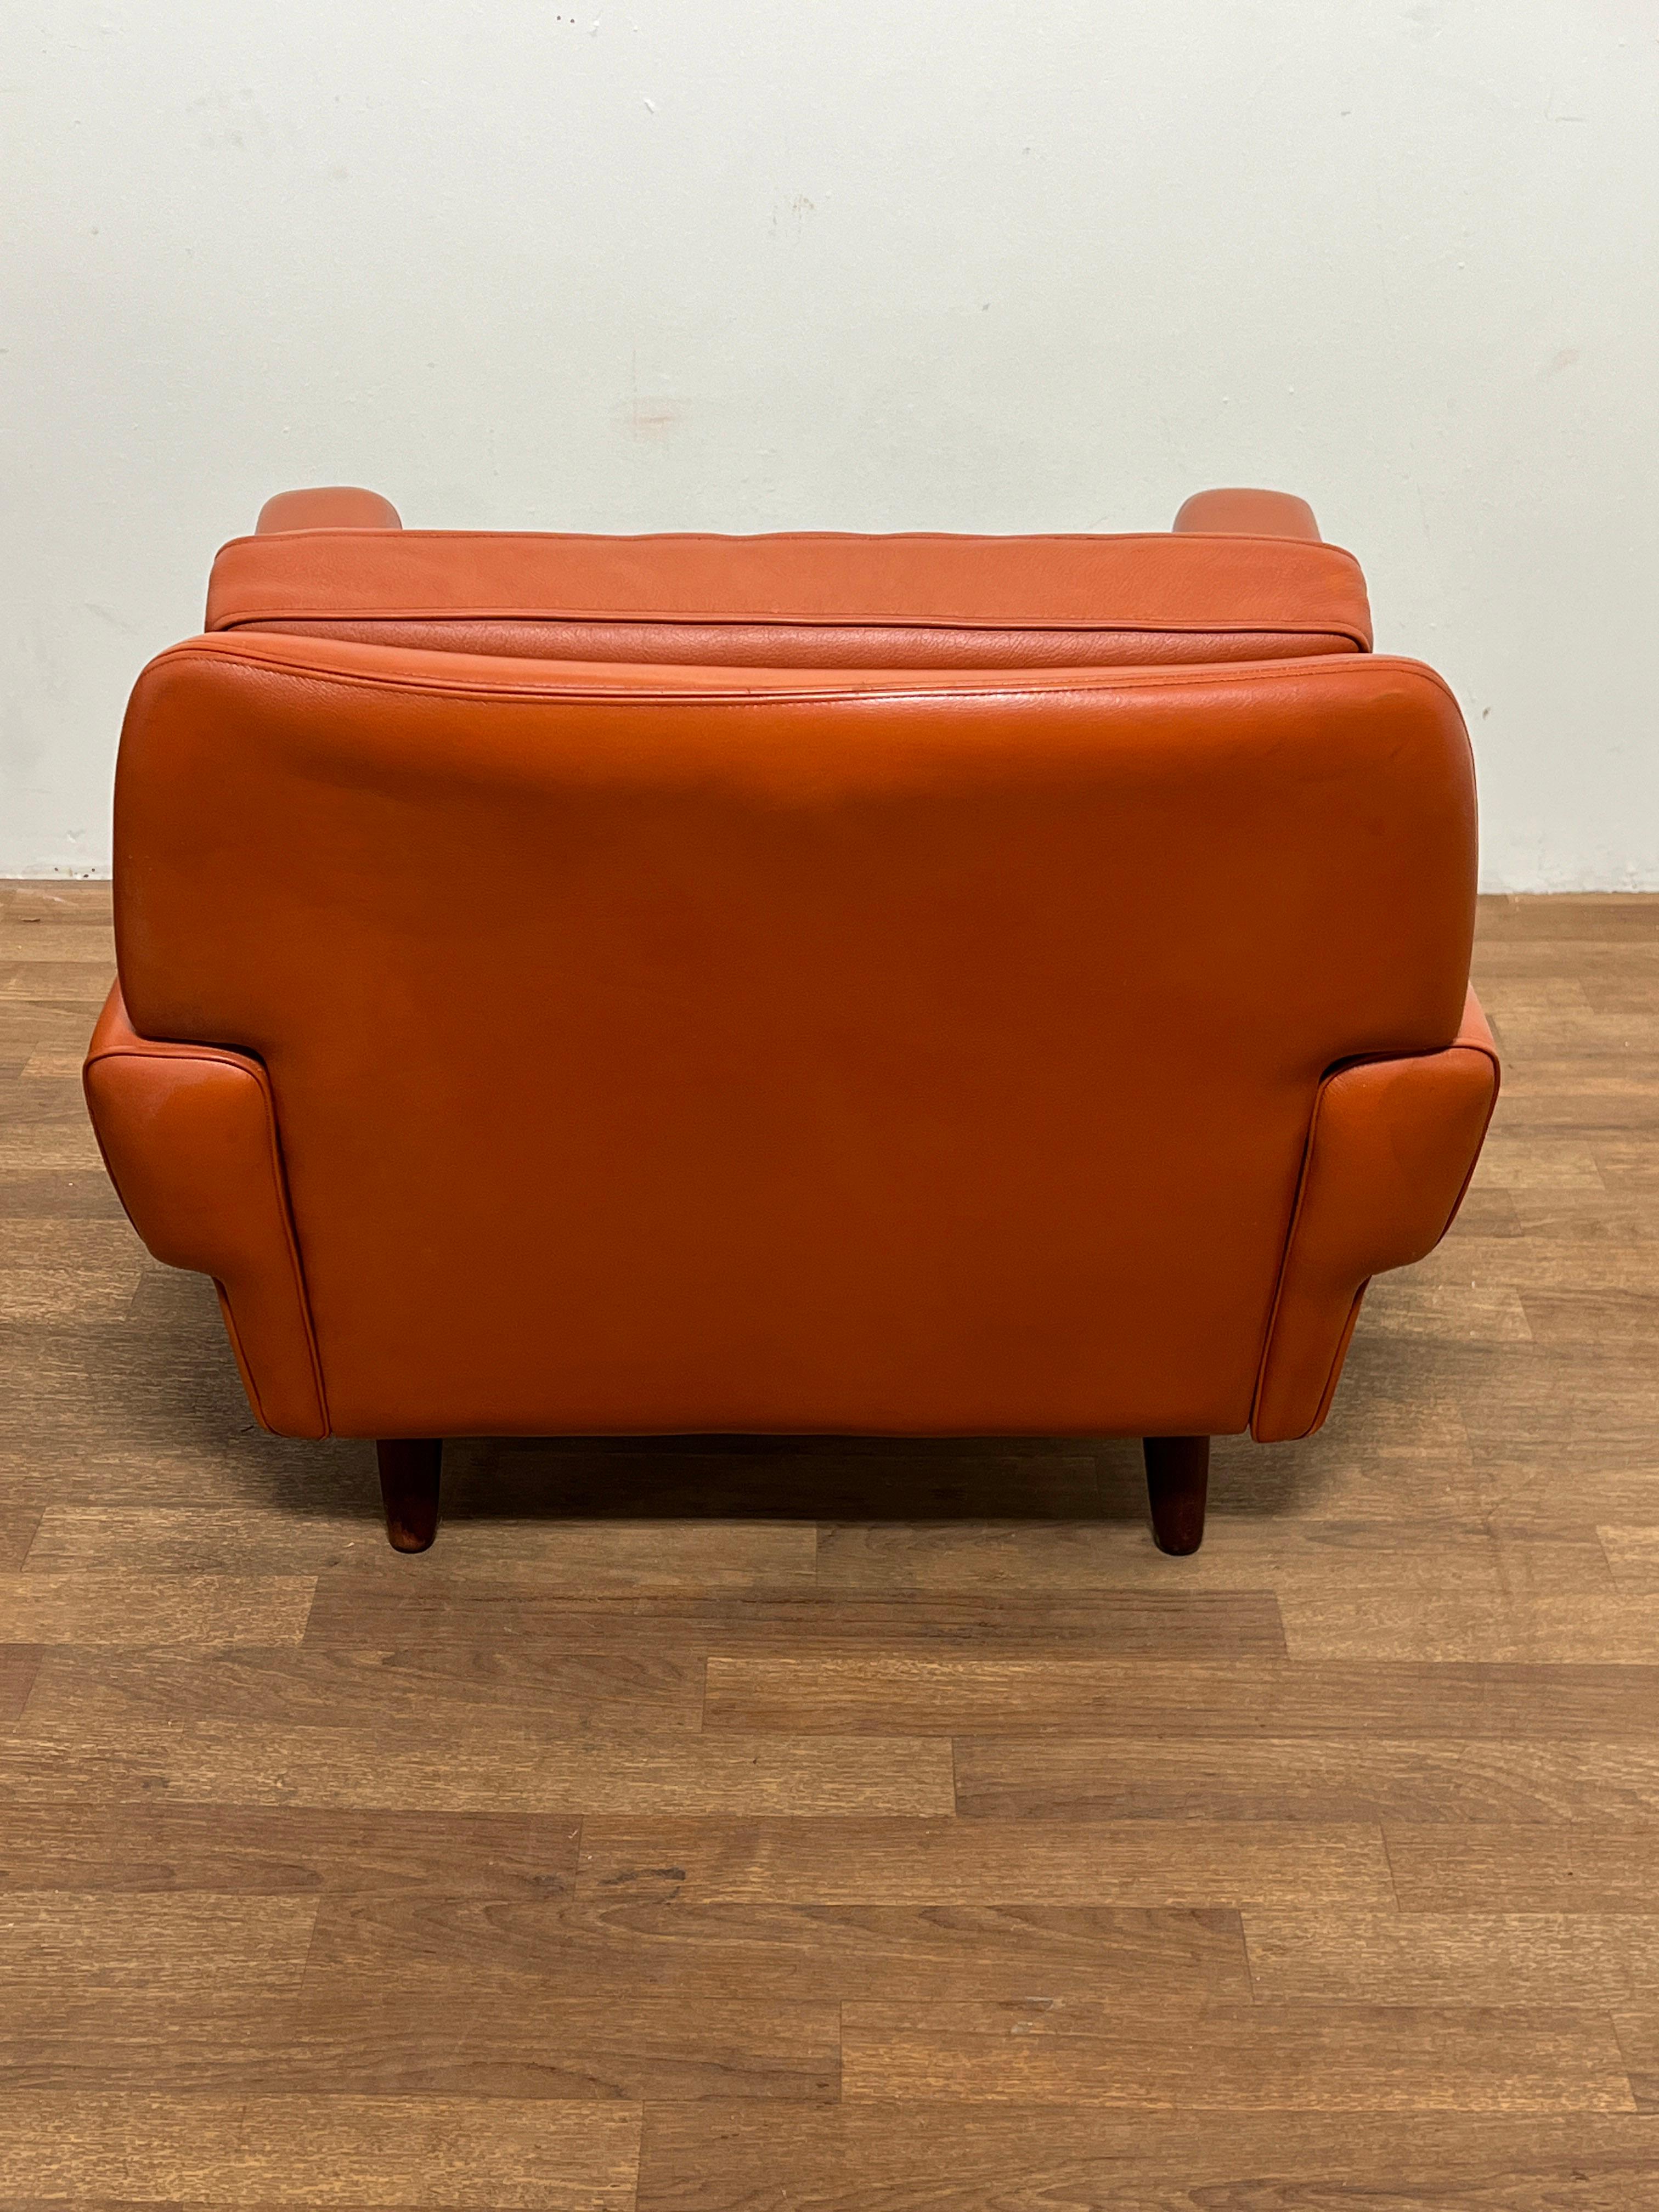 Pair of Danish Leather Lounge Chairs by Svend Skipper, Circa 1960s For Sale 2